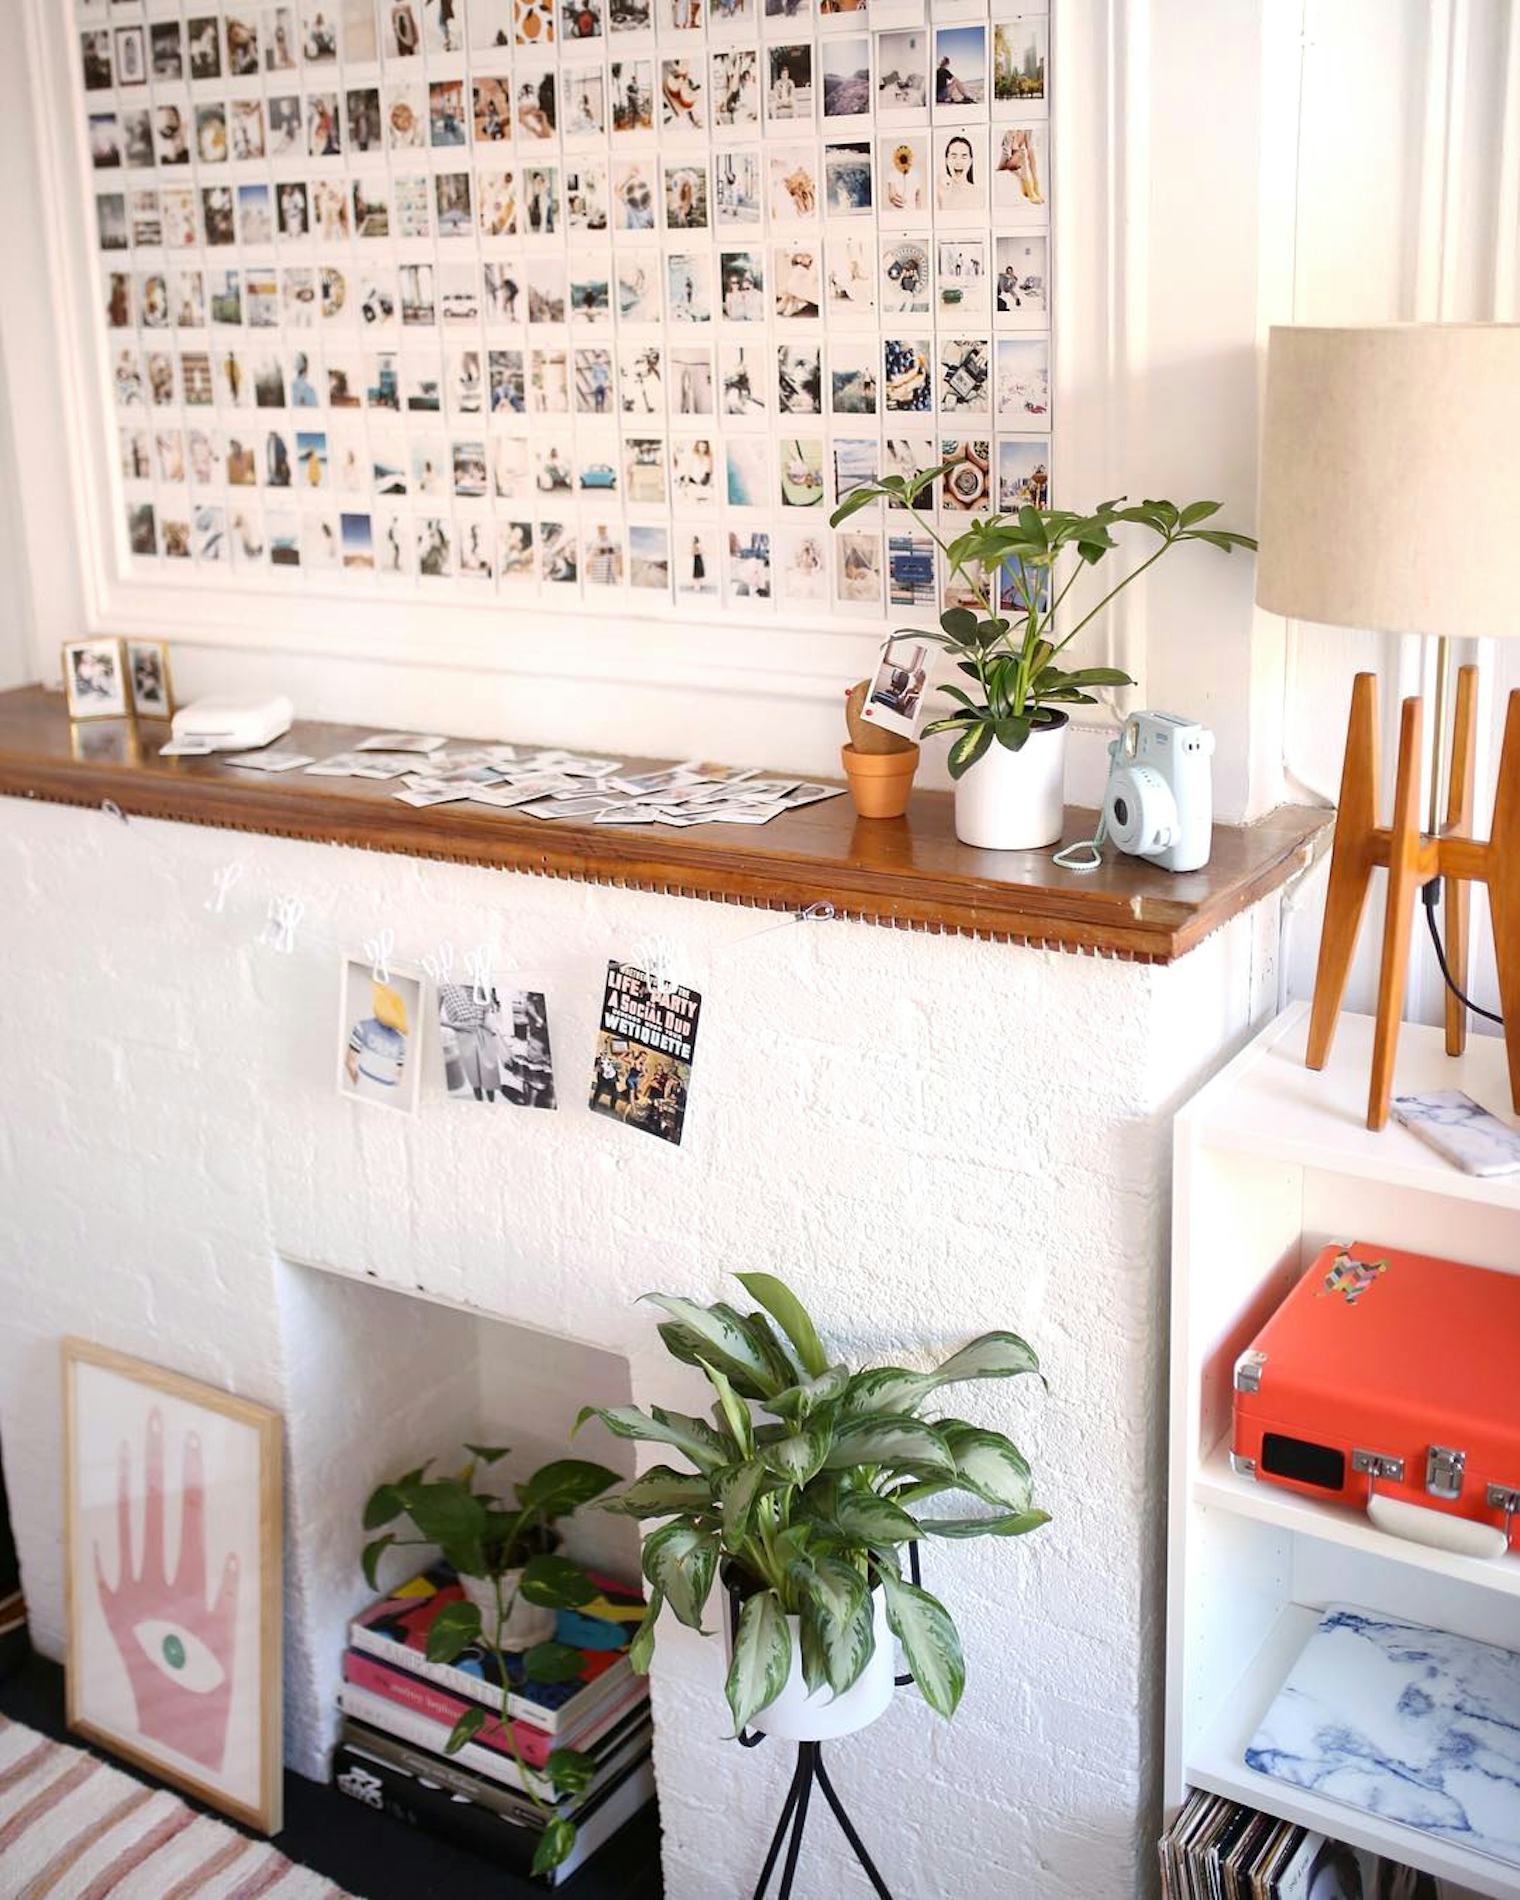 4 Ways To Decorate Your Home With Instagram